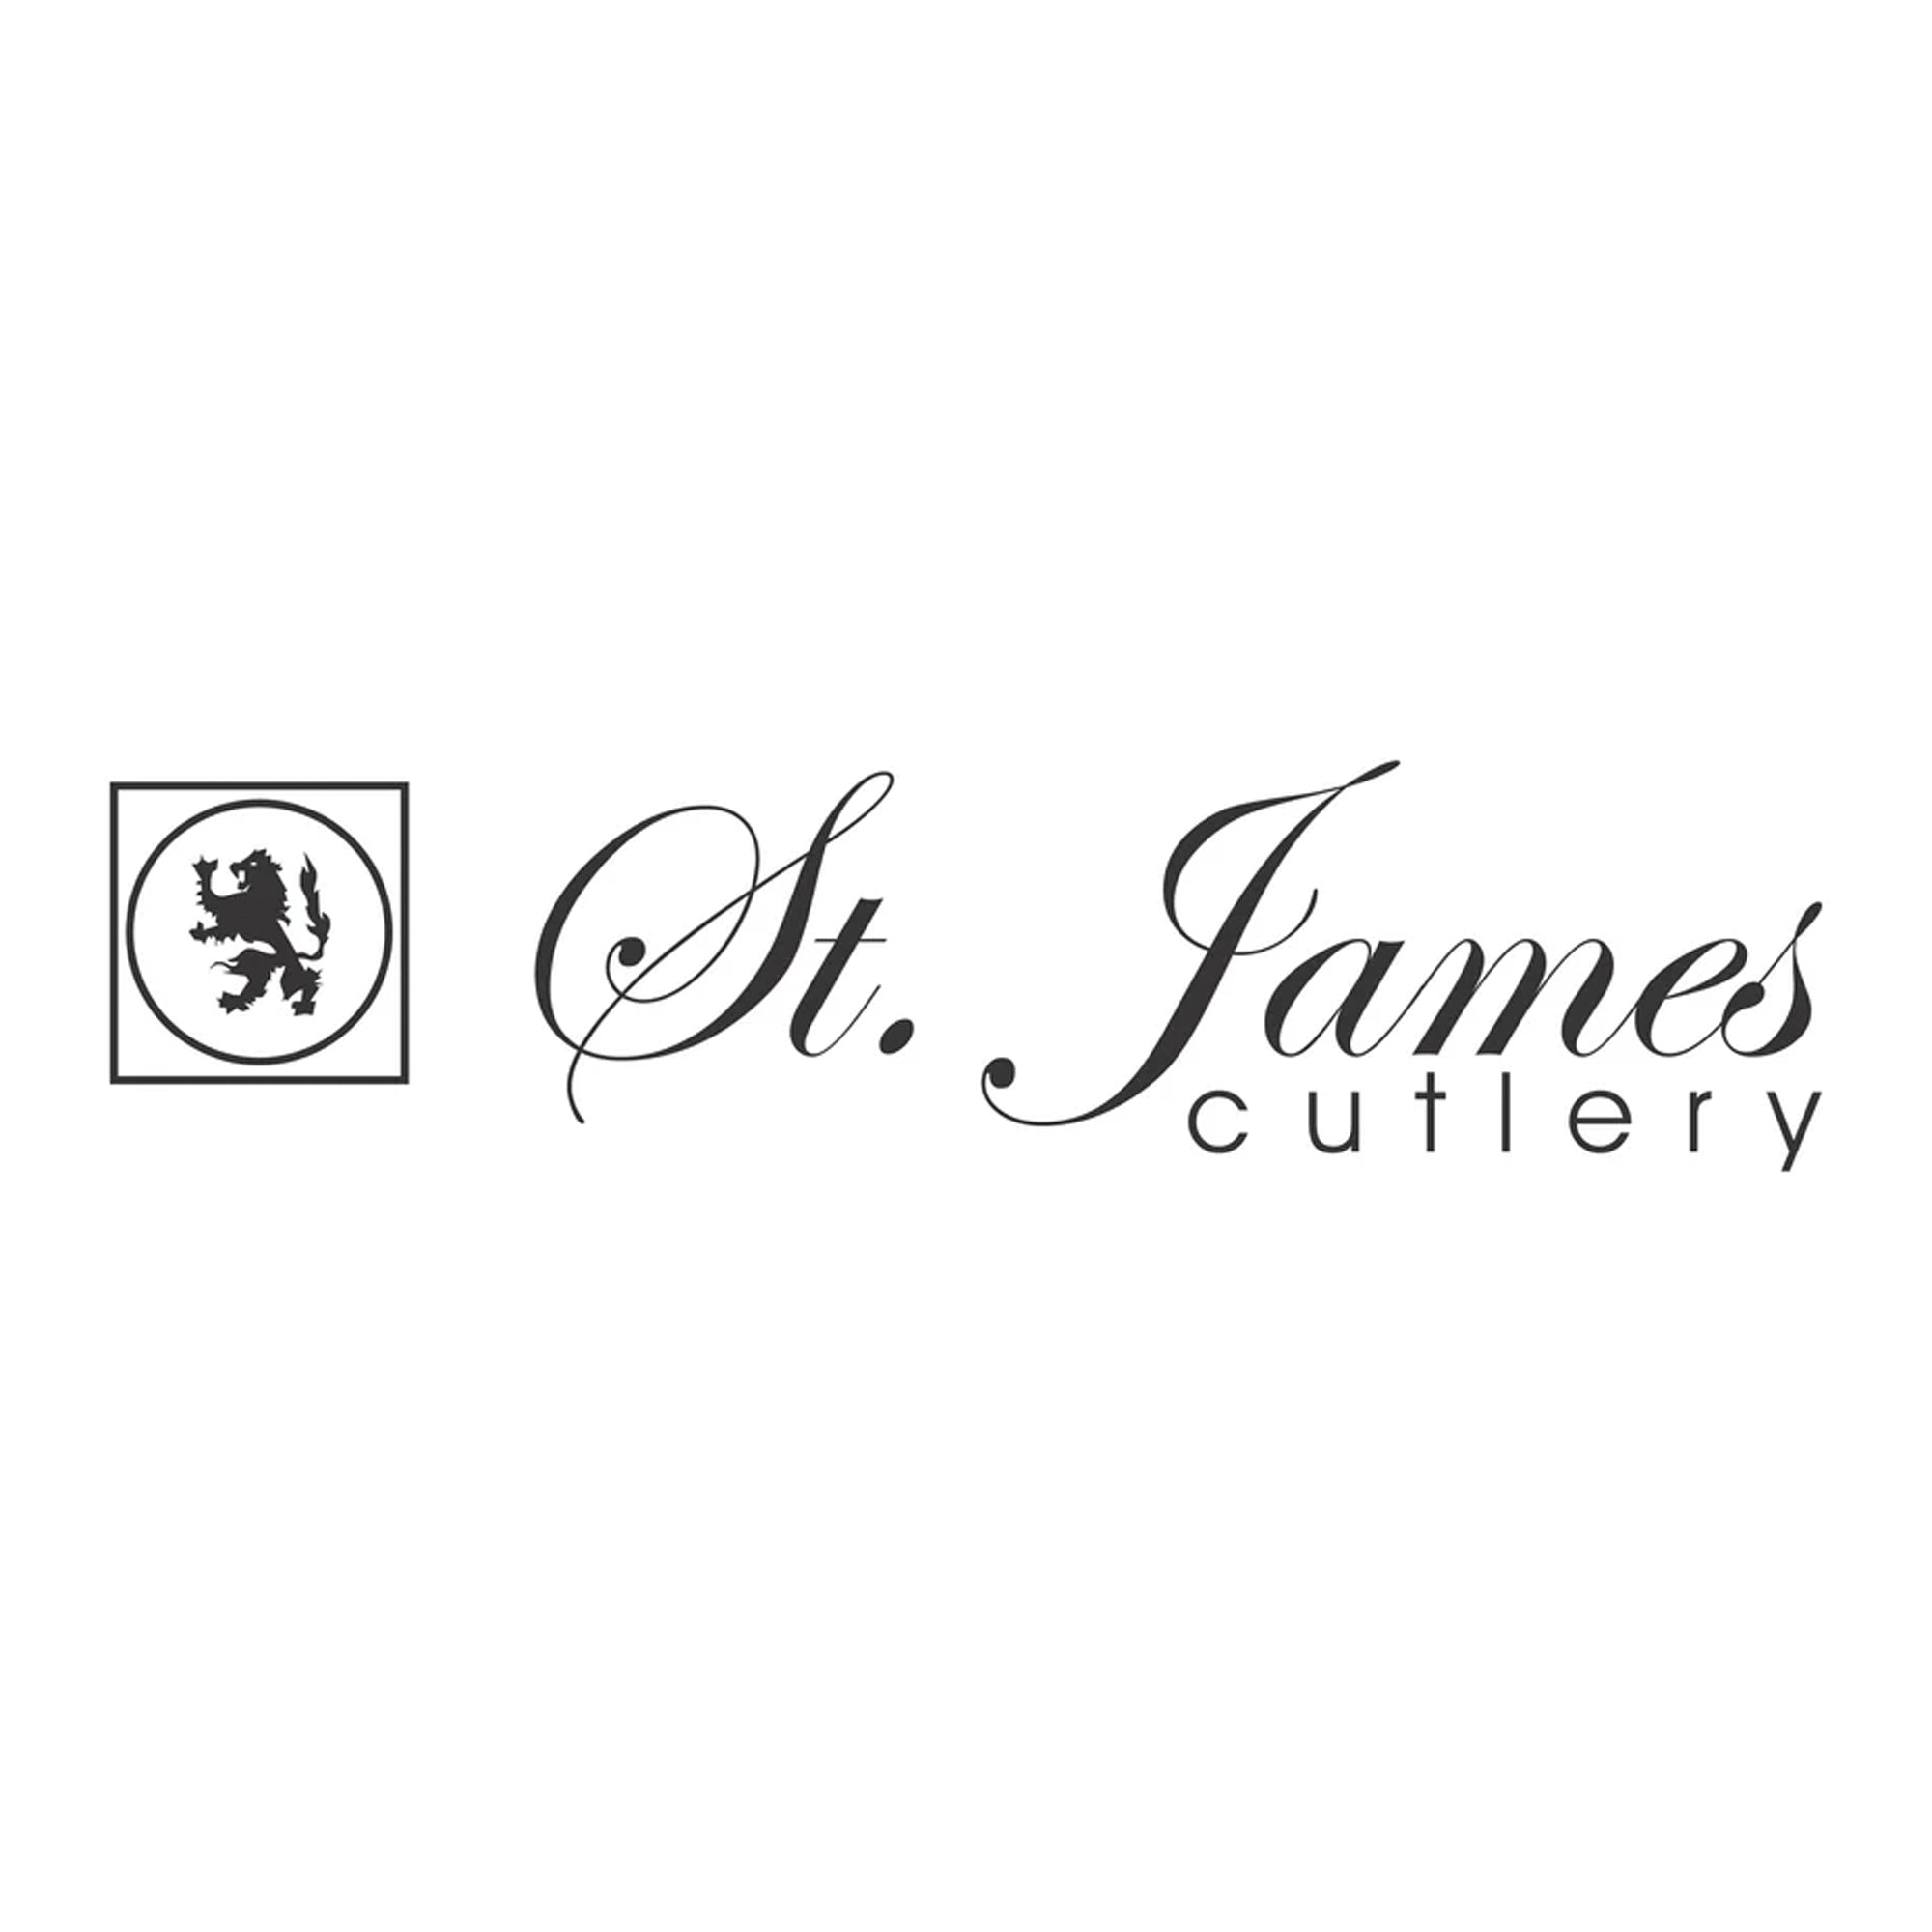 St James Cutlery